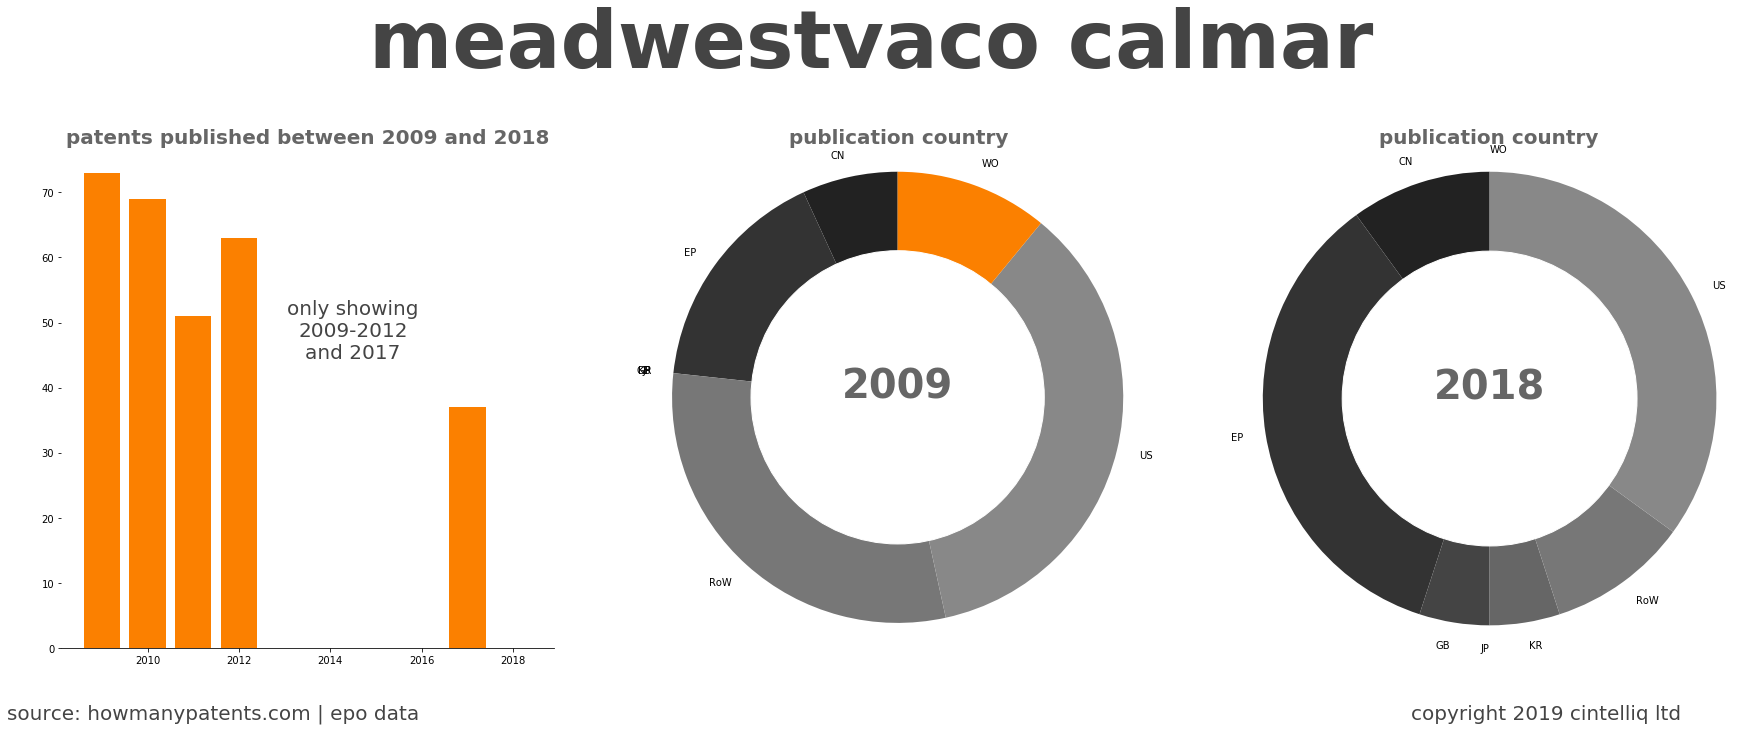 summary of patents for Meadwestvaco Calmar